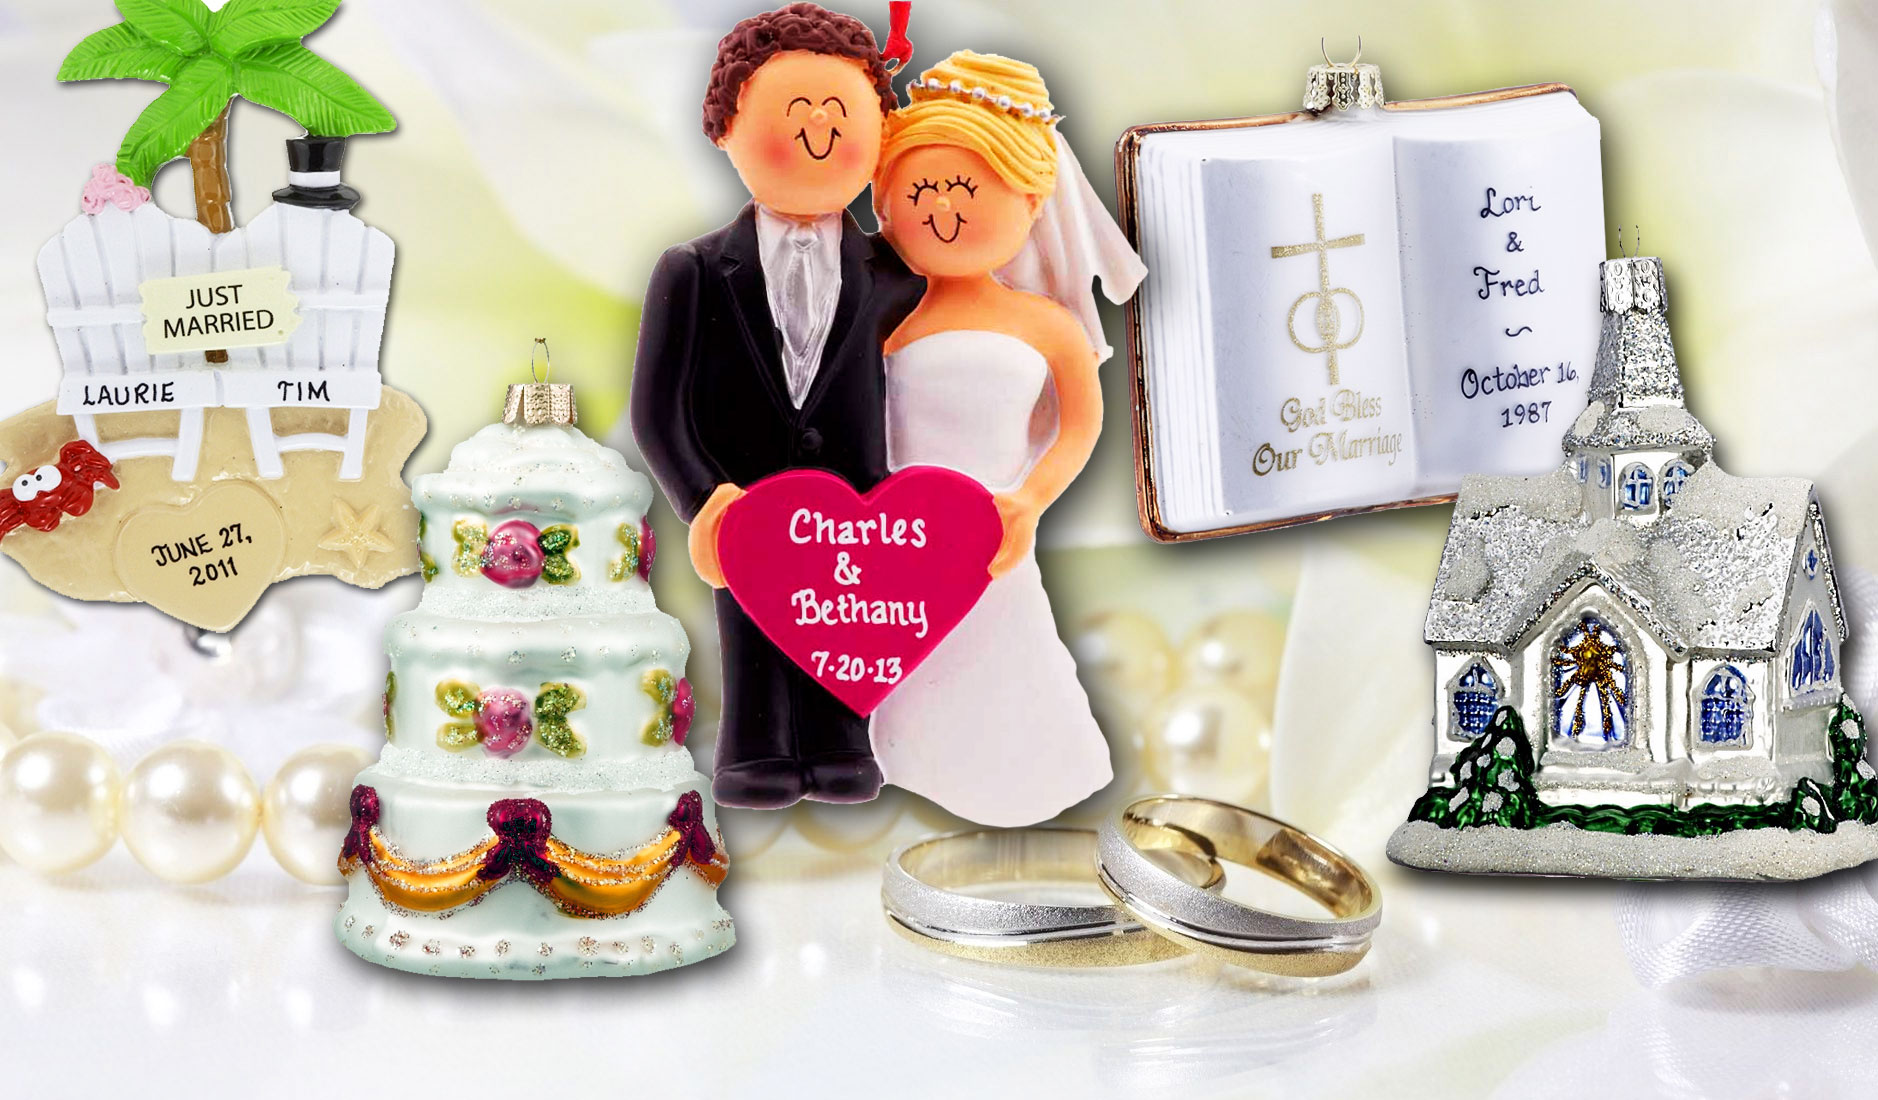 Ornaments with a wedding couple surrounded by a wedding cake, cathedral, bible, rings, and a honeymoon scene | OrnamentShop.com